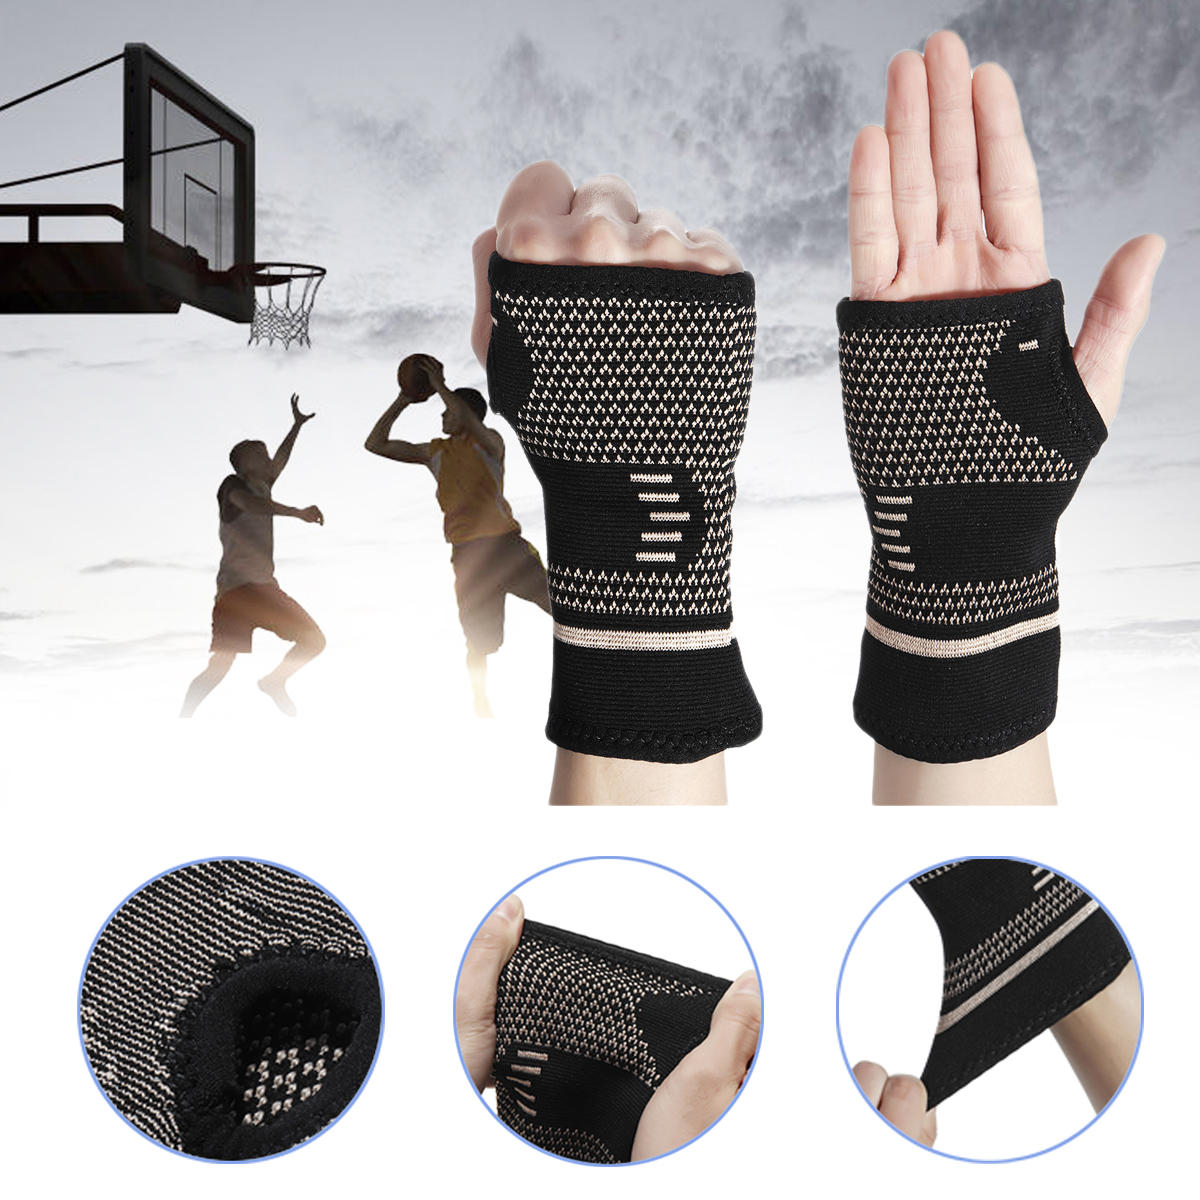 KALOAD 1PC Copper Infused Wrist Sleeve Palm Hand Support Outdoor Sports Bracer Support Fitness Prote